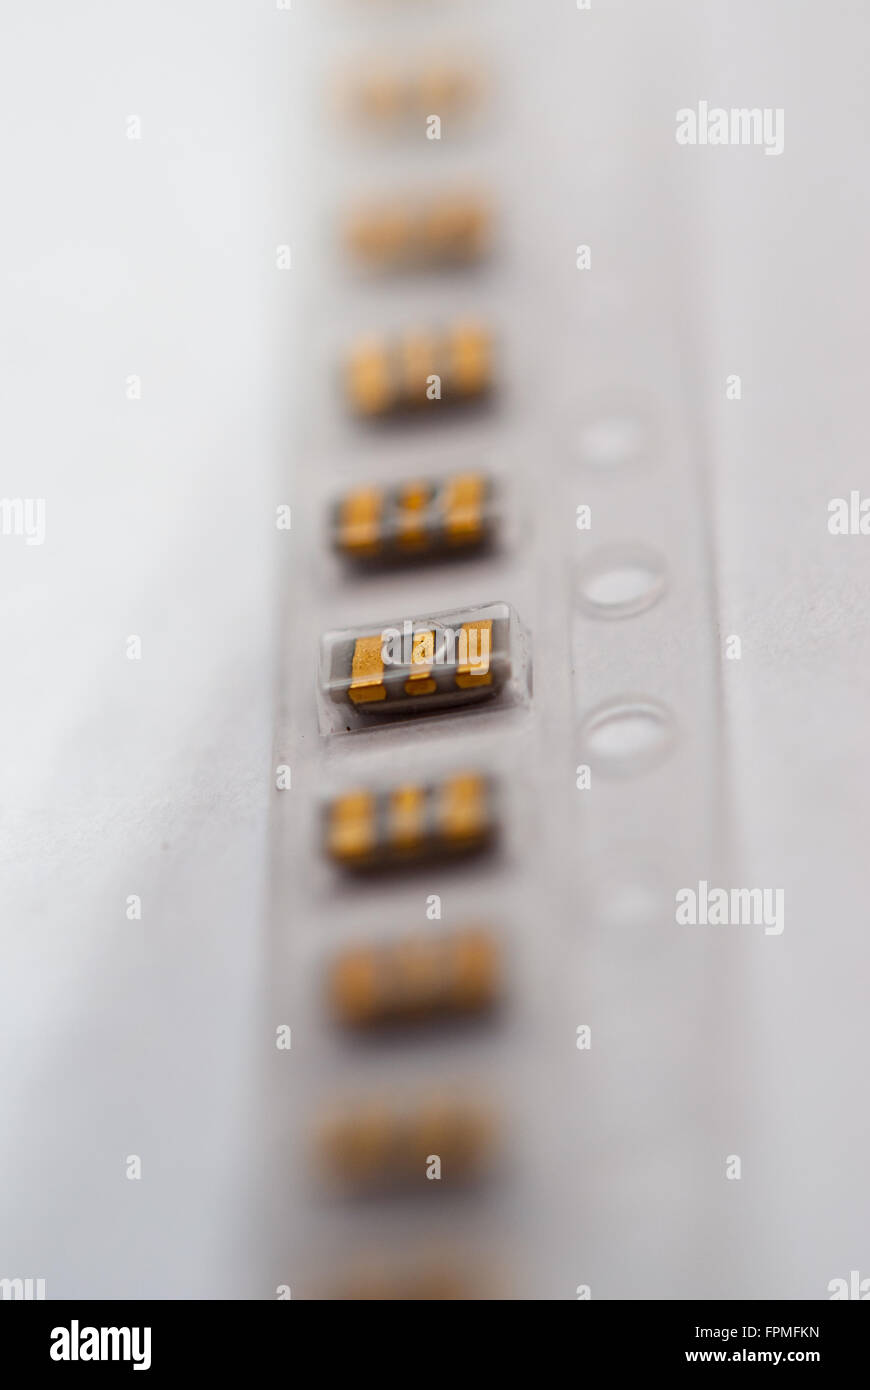 Package of smd capacitors (Murata brand) on a white background closeup. Stock Photo